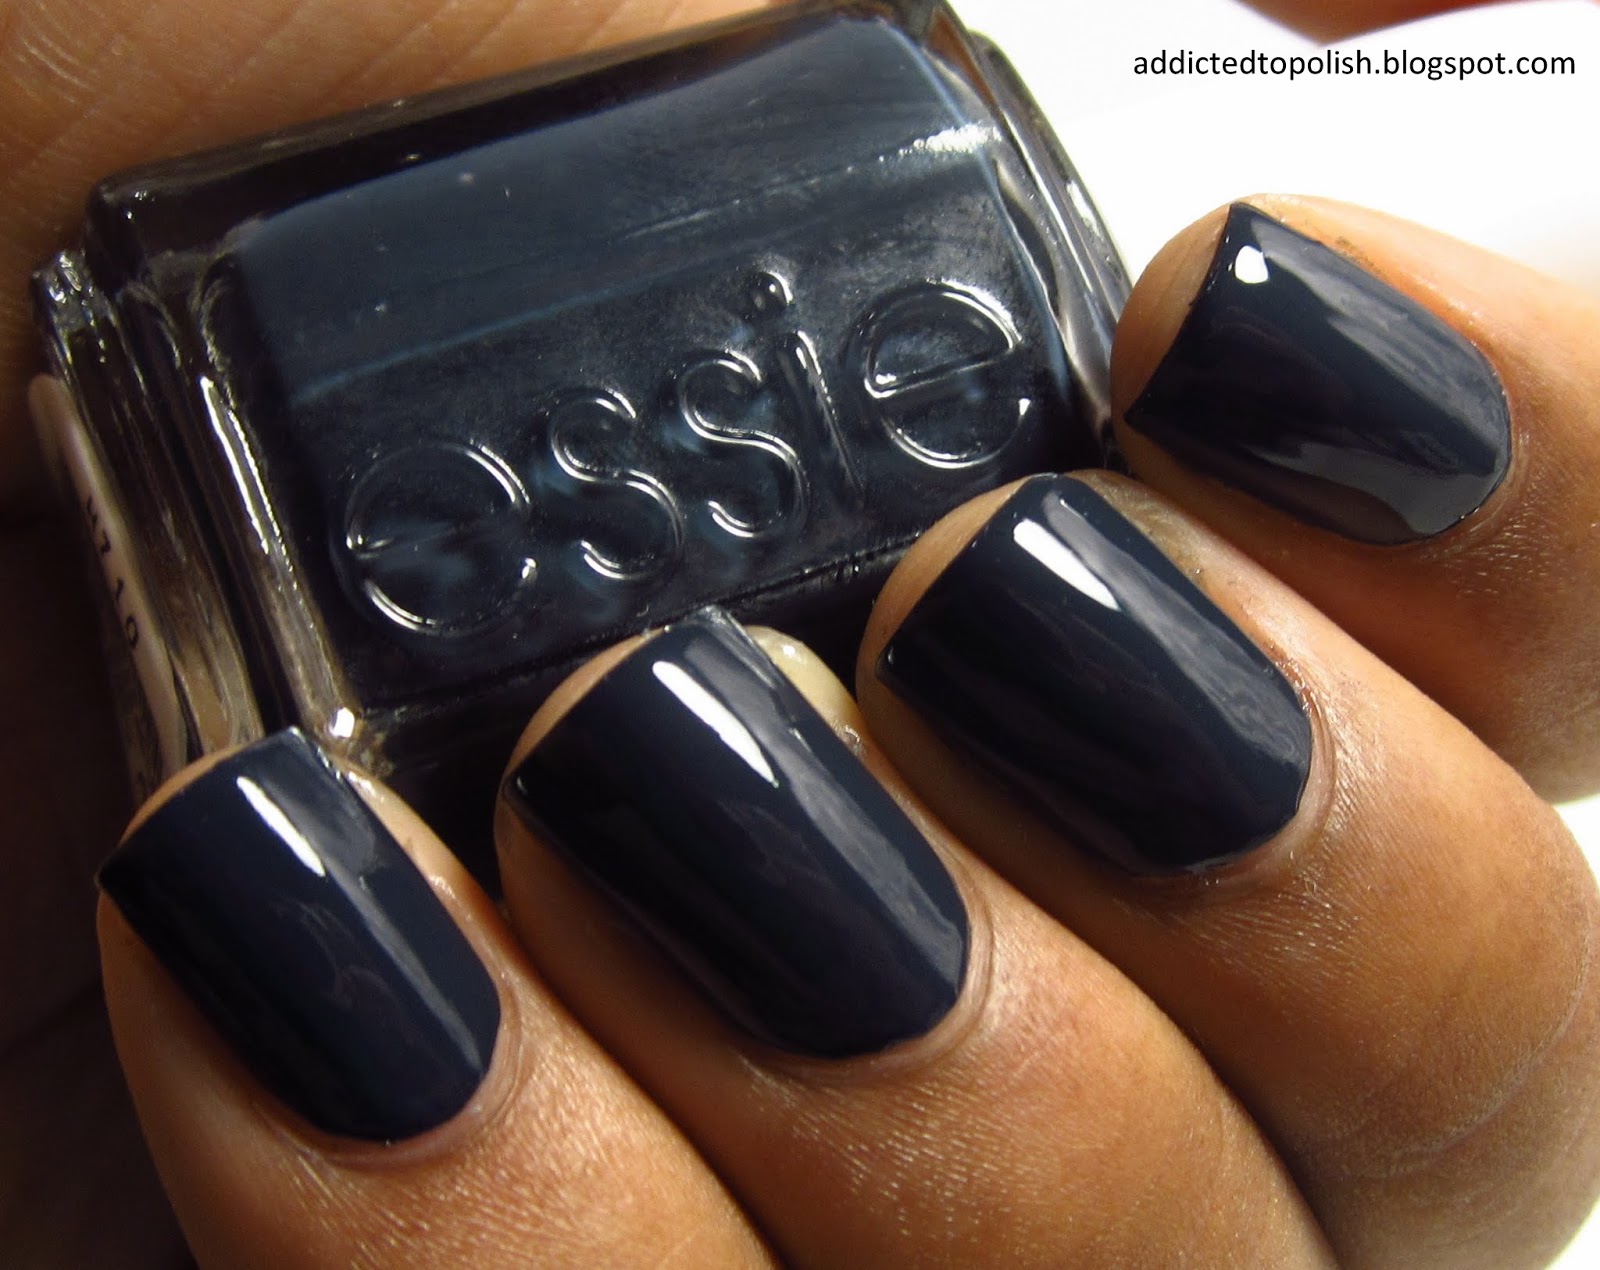 Bobbing for Baubles Essie Nail Polish - wide 10